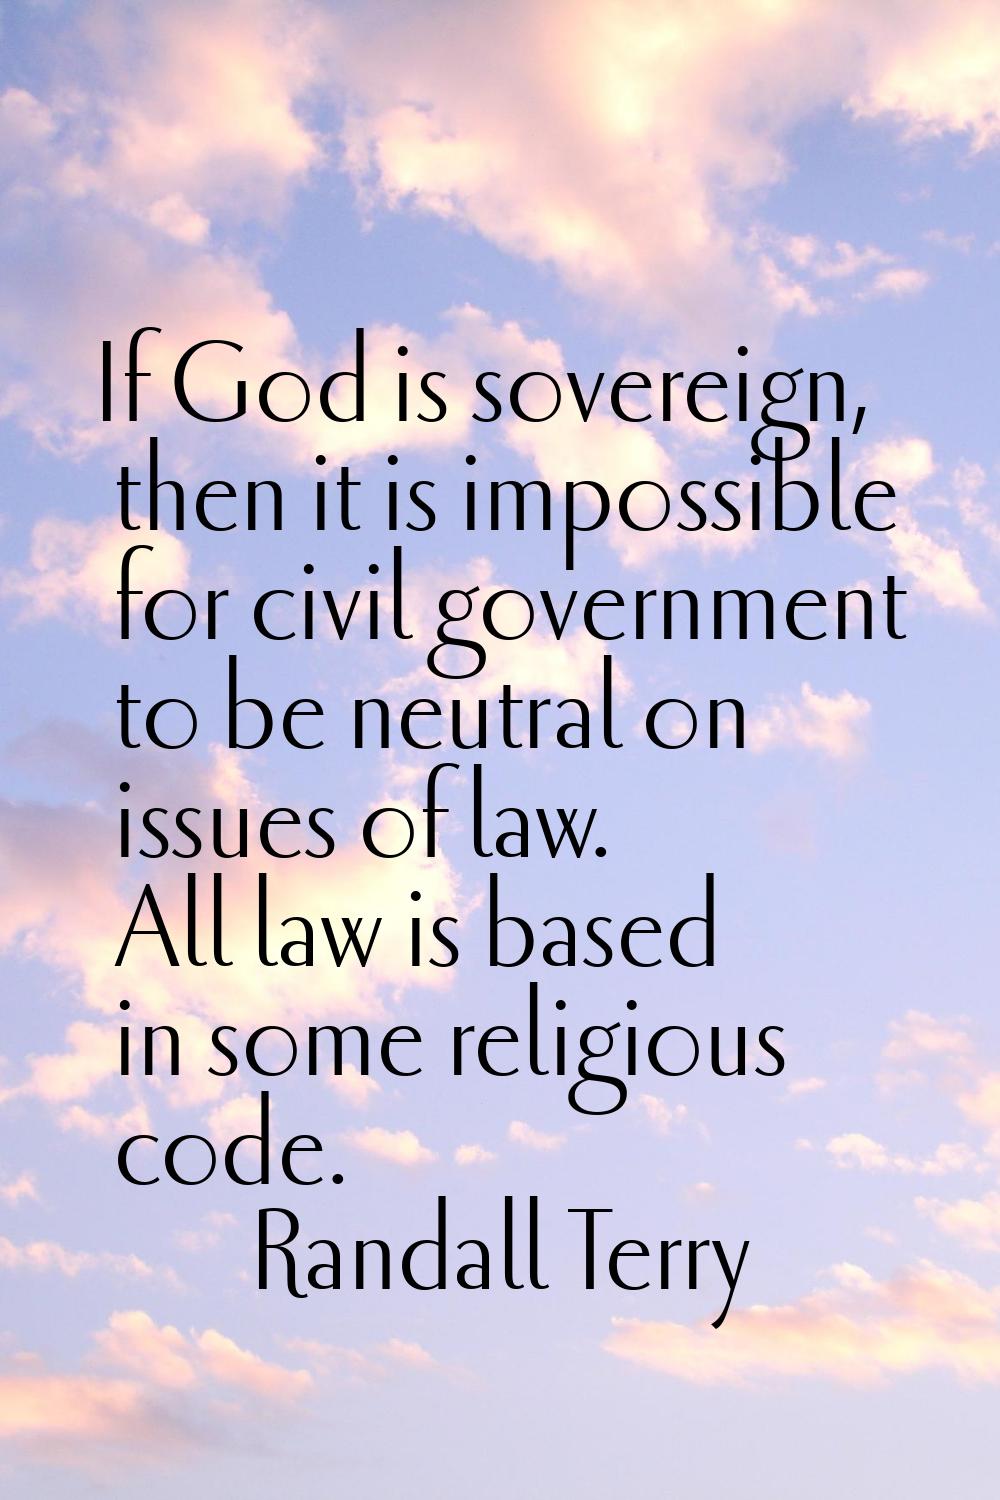 If God is sovereign, then it is impossible for civil government to be neutral on issues of law. All